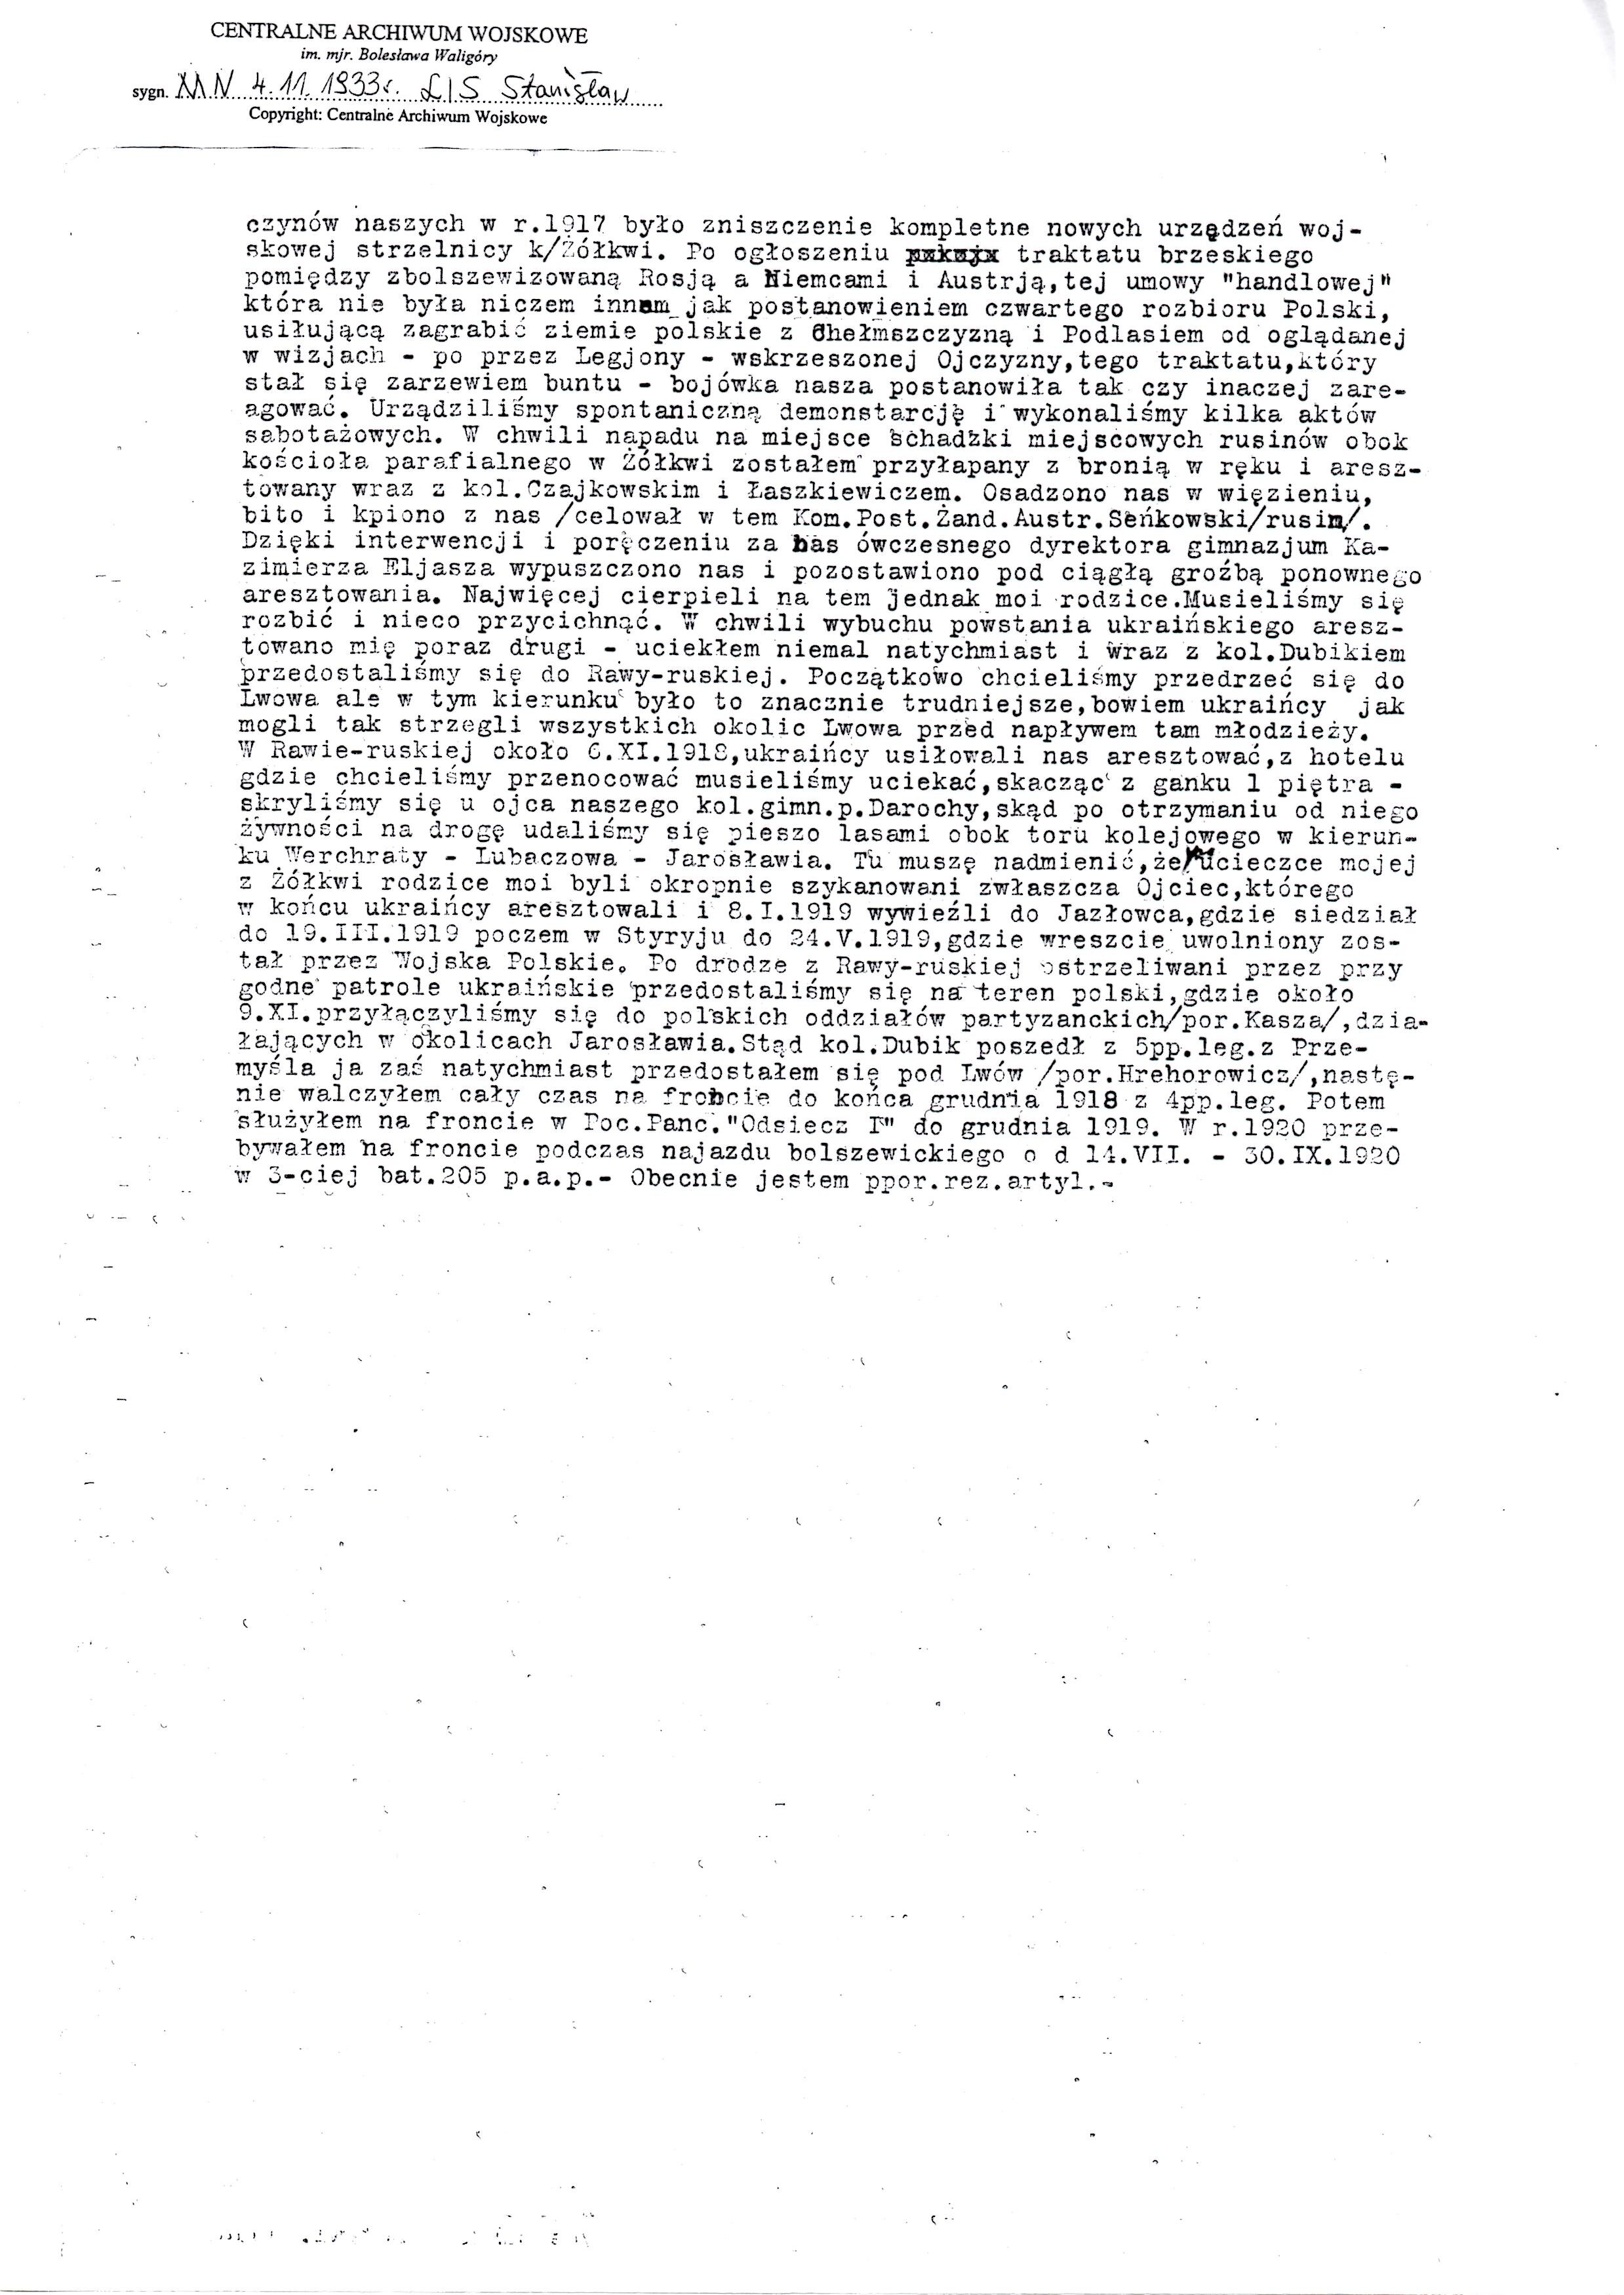 Stanislaw Lis typed life story page 2.jpg